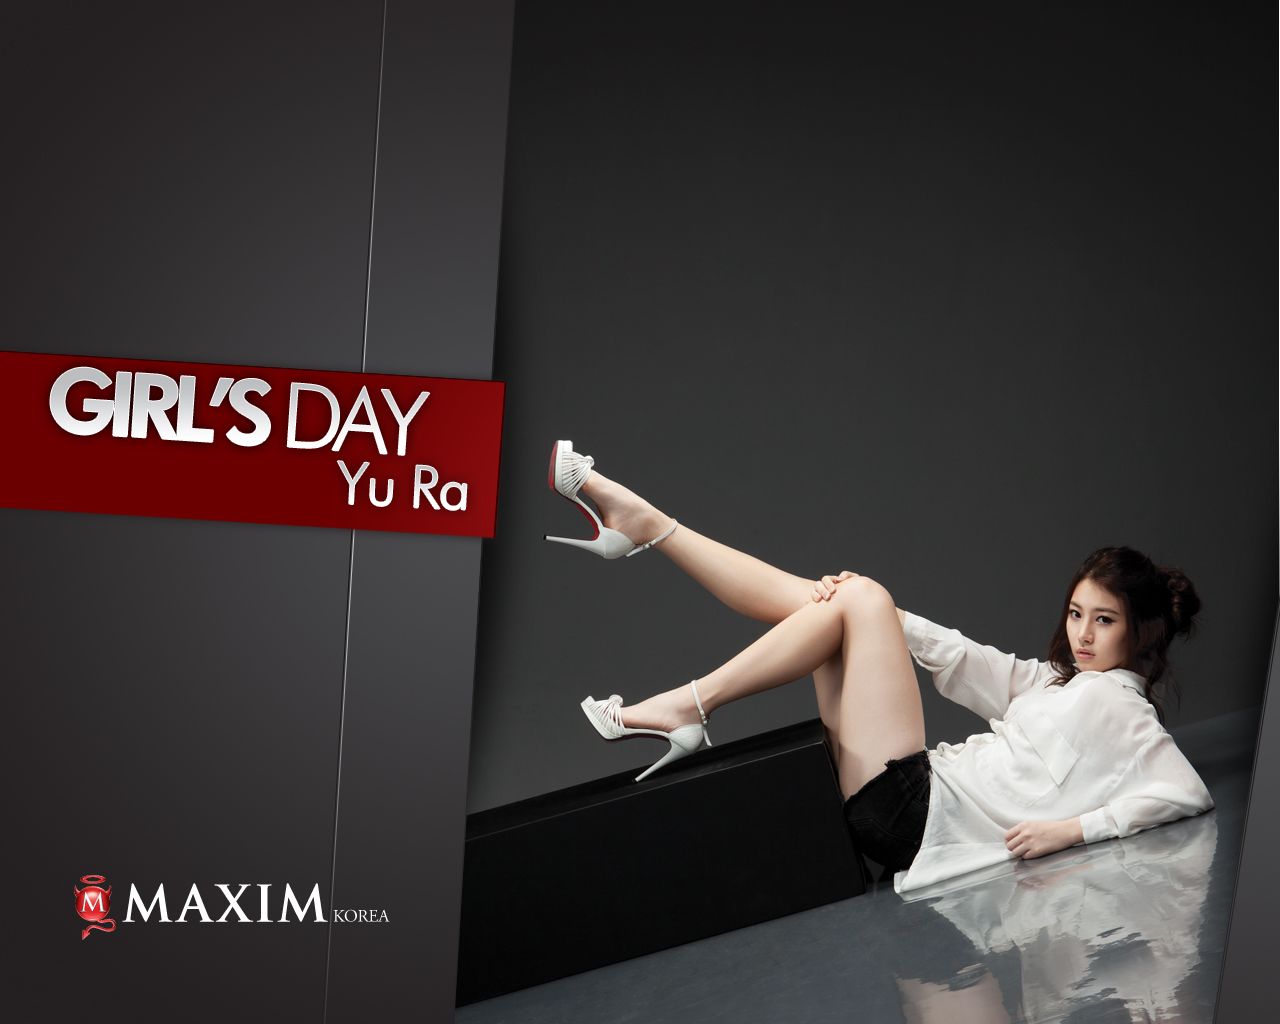 [WALLPAPERS] Girls Day Official Wallpaper from Maxim